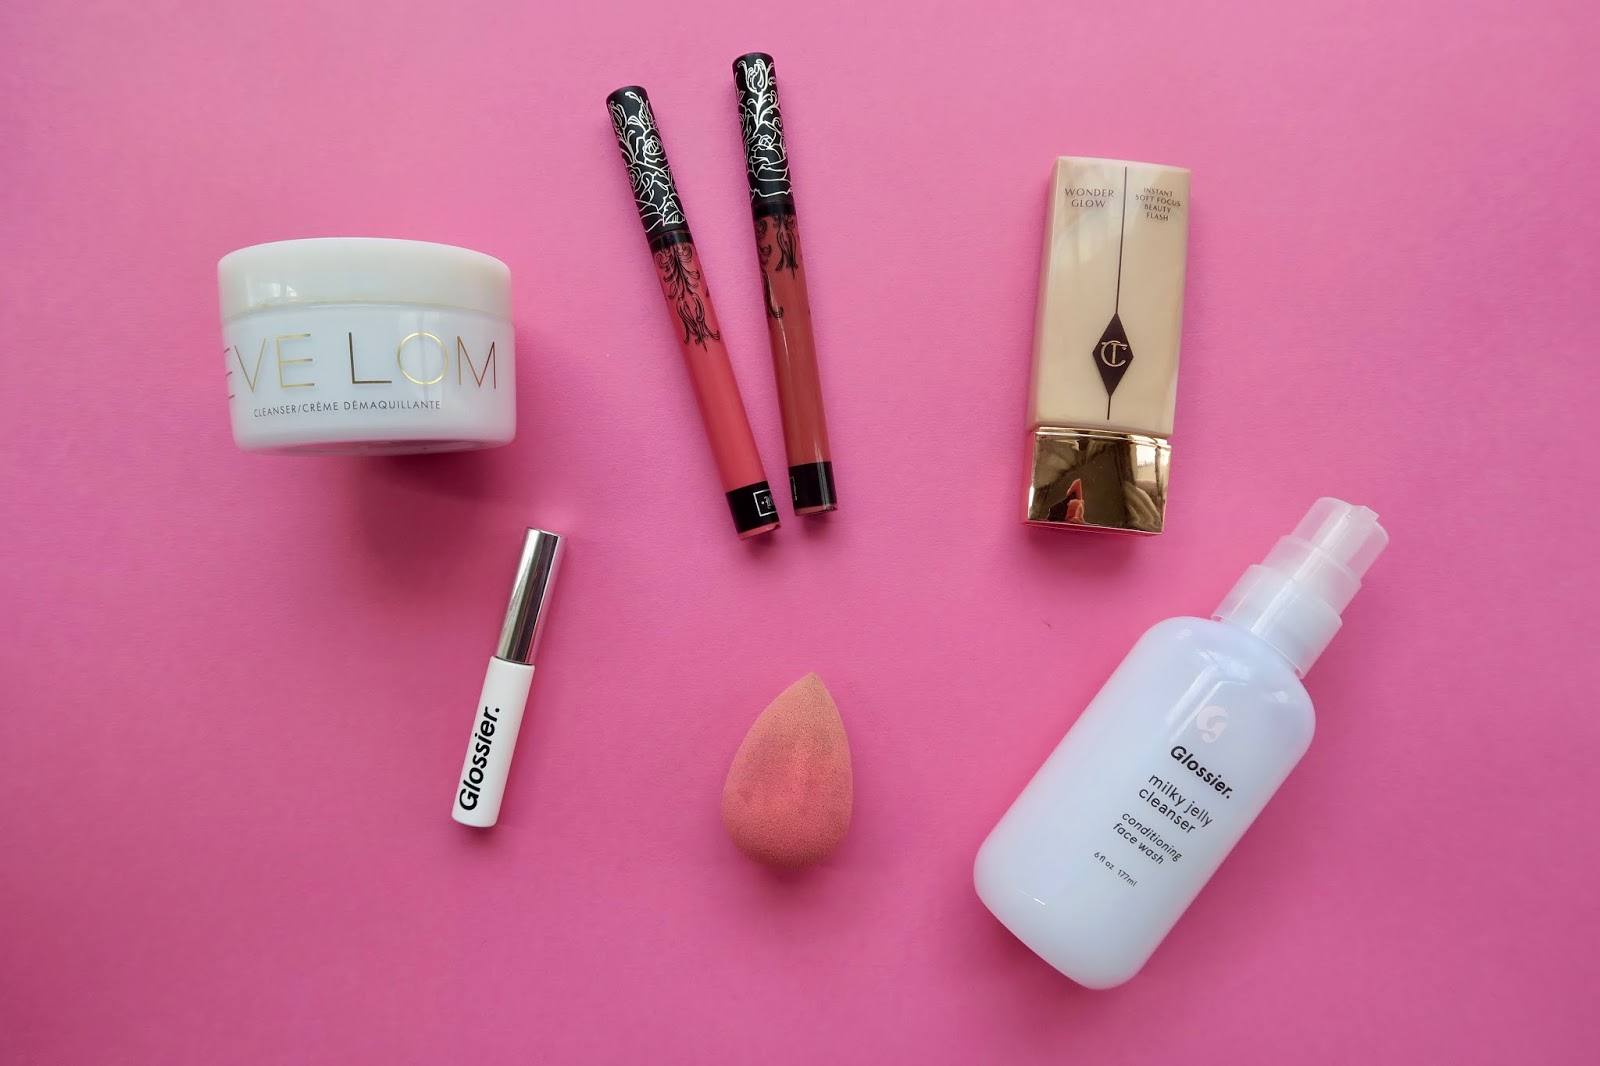 The Best Beauty Products from the Past Year by Laura Lewis